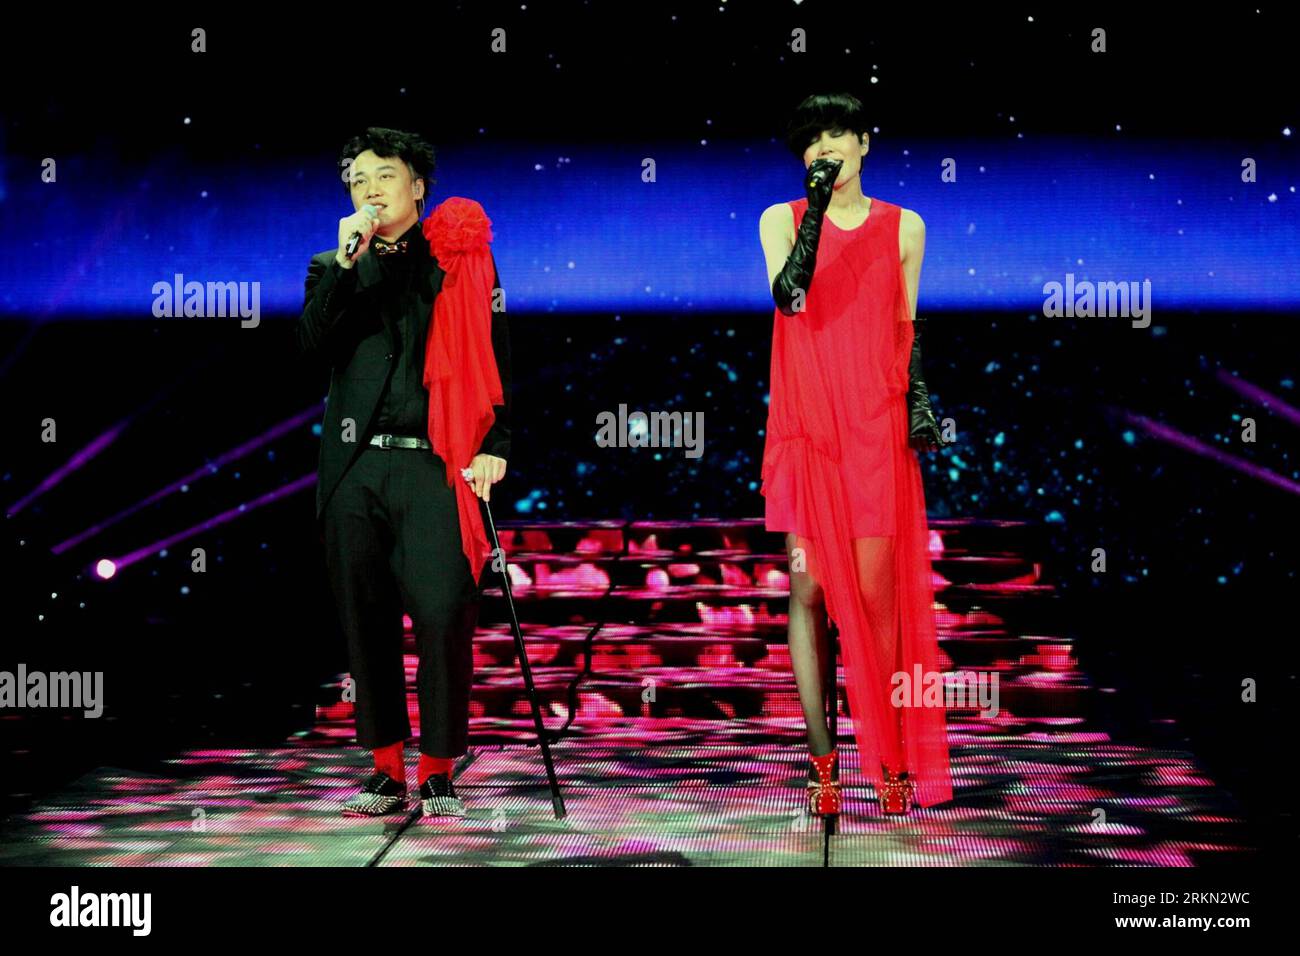 Bildnummer: 56944273  Datum: 22.01.2012  Copyright: imago/Xinhua (120122) -- BEIJING, Jan. 22, 2012 (Xinhua) -- Singers Eason Chan (L) and Faye Wong perform during a rehearsal of the Spring Festival Gala Evening at China Central Television (CCTV) in Beijing, capital of China. China s annual televised Spring Festival (Lunar New Year) Gala, a traditional centerpiece of celebrations to mark the country s most important festival, was shown in the evening of Jan. 22. (Xinhua) (mcg) CHINA-BEIJING-CCTV-SPRING FESTIVAL GALA EVENING-REHEARSAL (CN) PUBLICATIONxNOTxINxCHN People Entertainment Musik Aktio Stock Photo